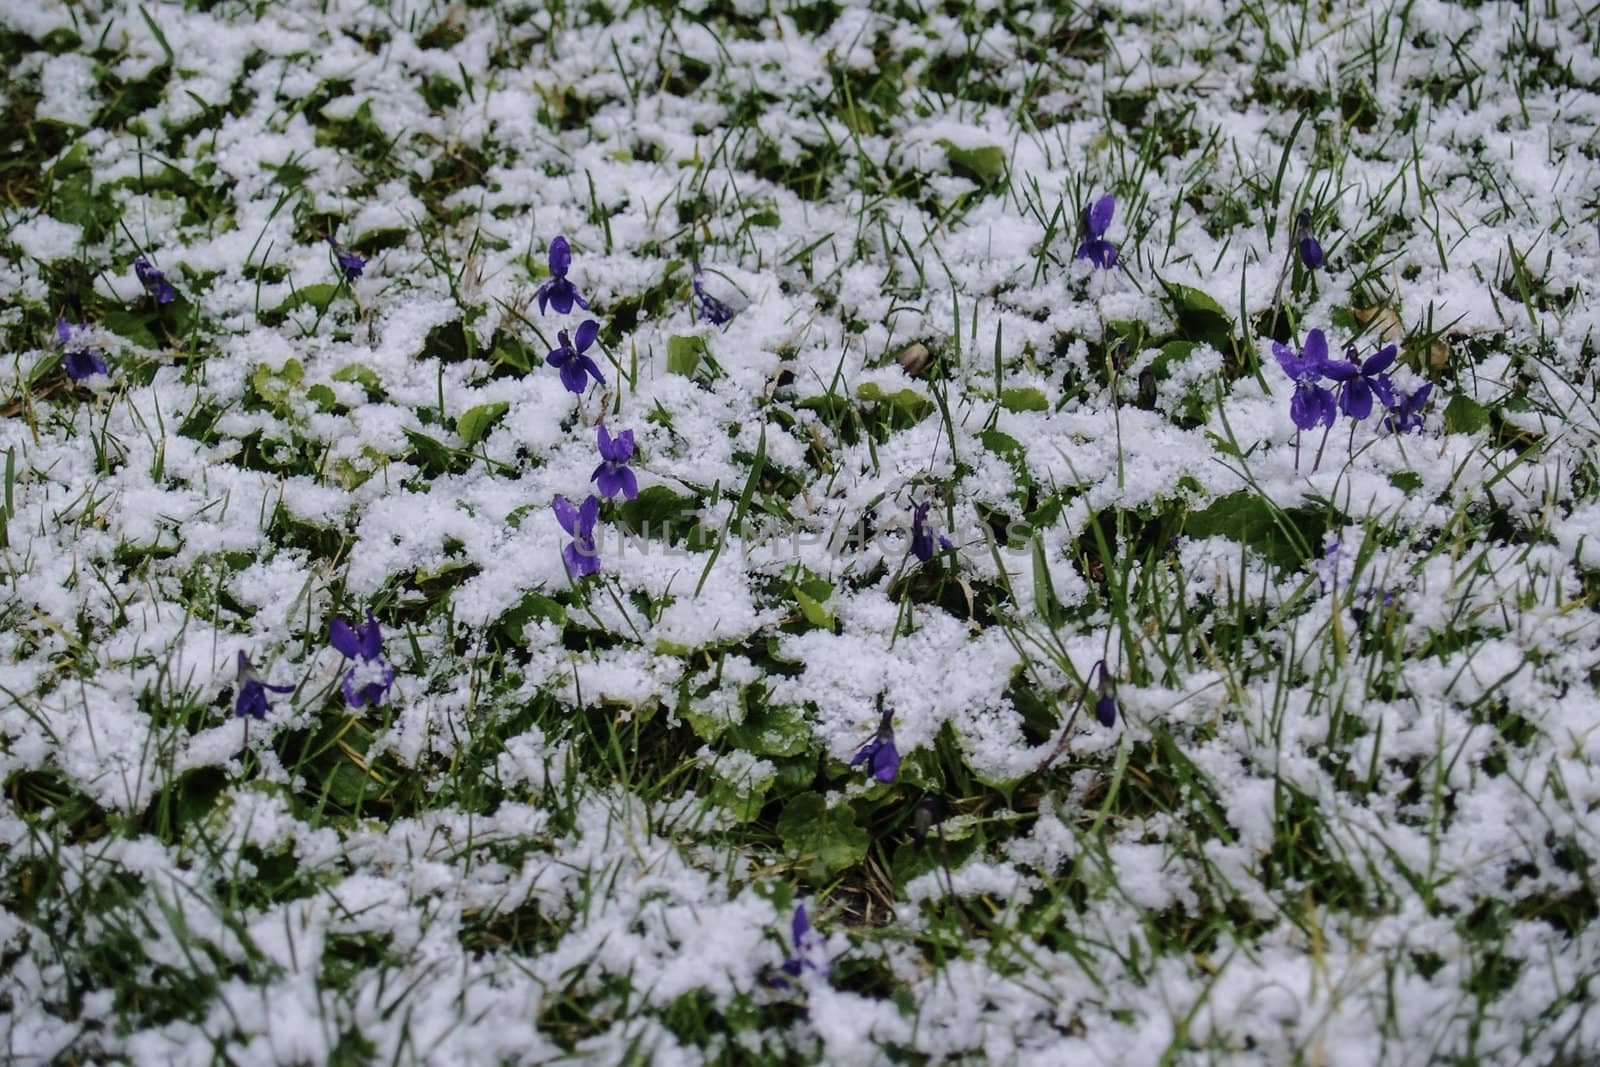 piece of grass with flowers and snow